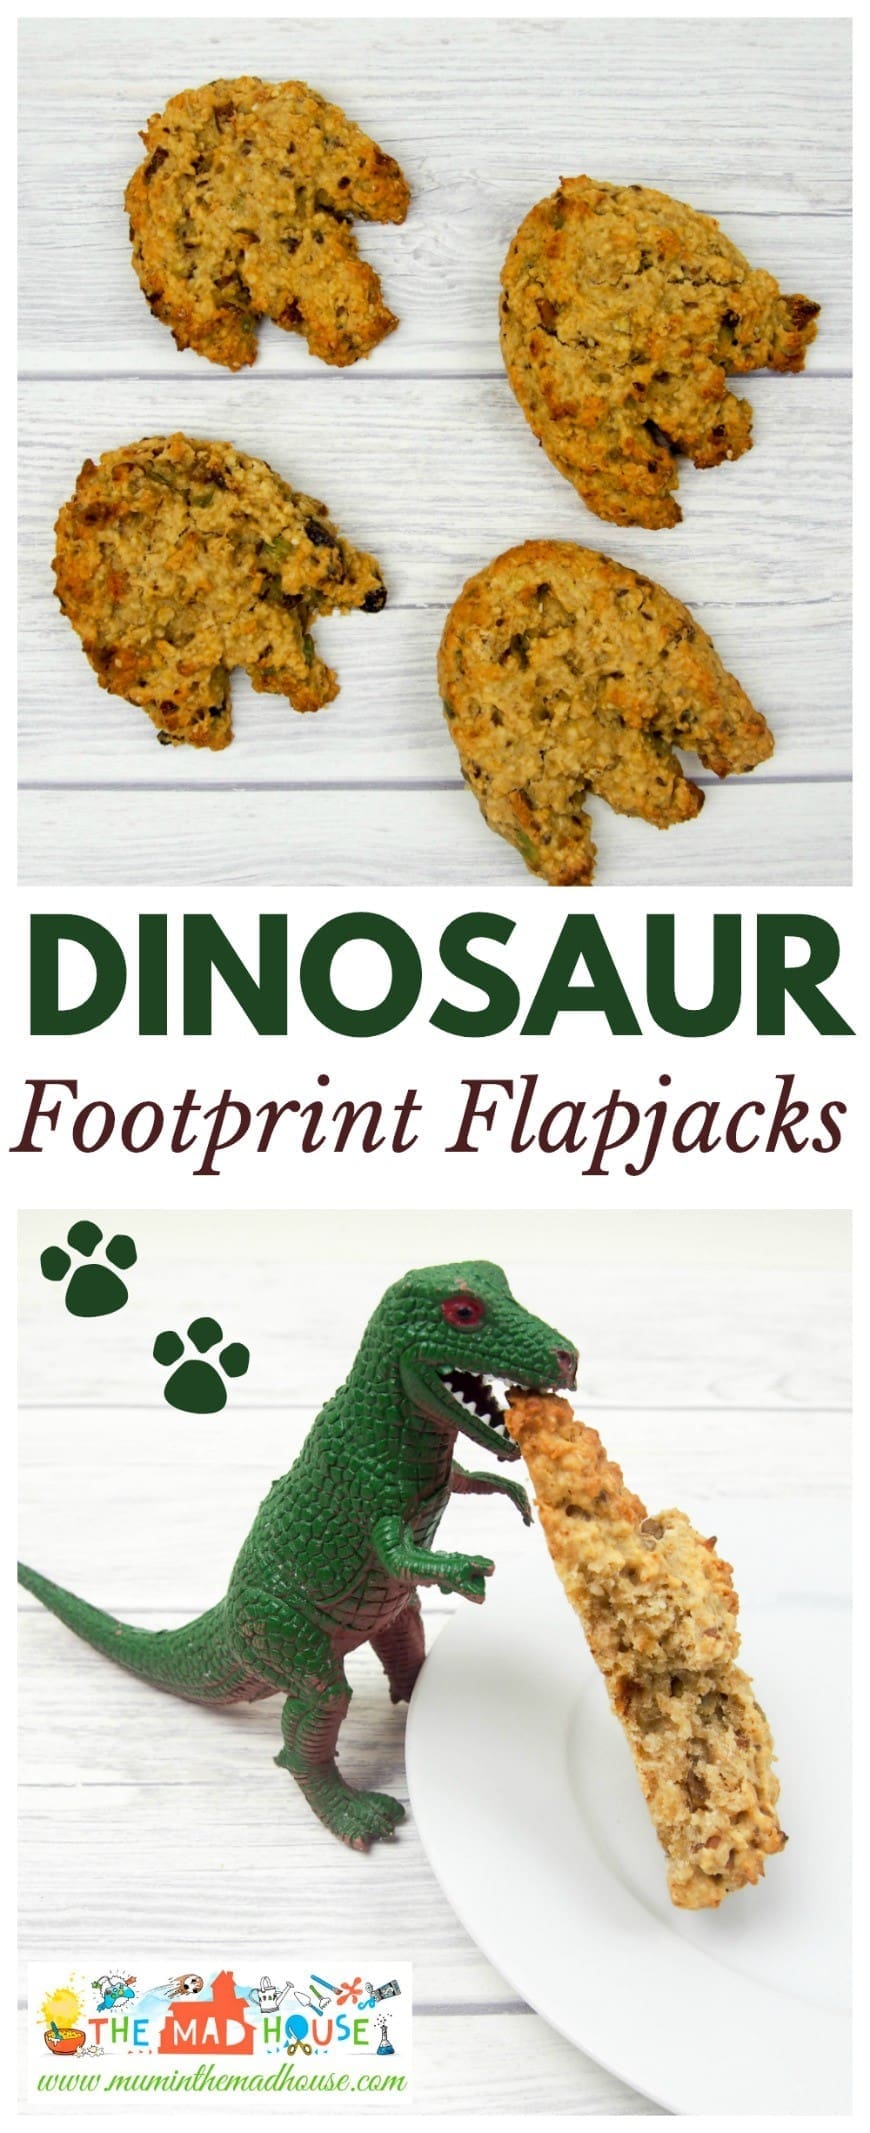 These delicious Dinosaur footprint loaded flapjacks are perfect for healthy breakfasts on the go and are full of nuts and dried fruits.  They are perfect for encouraging kids to eat new things and delicious too. 